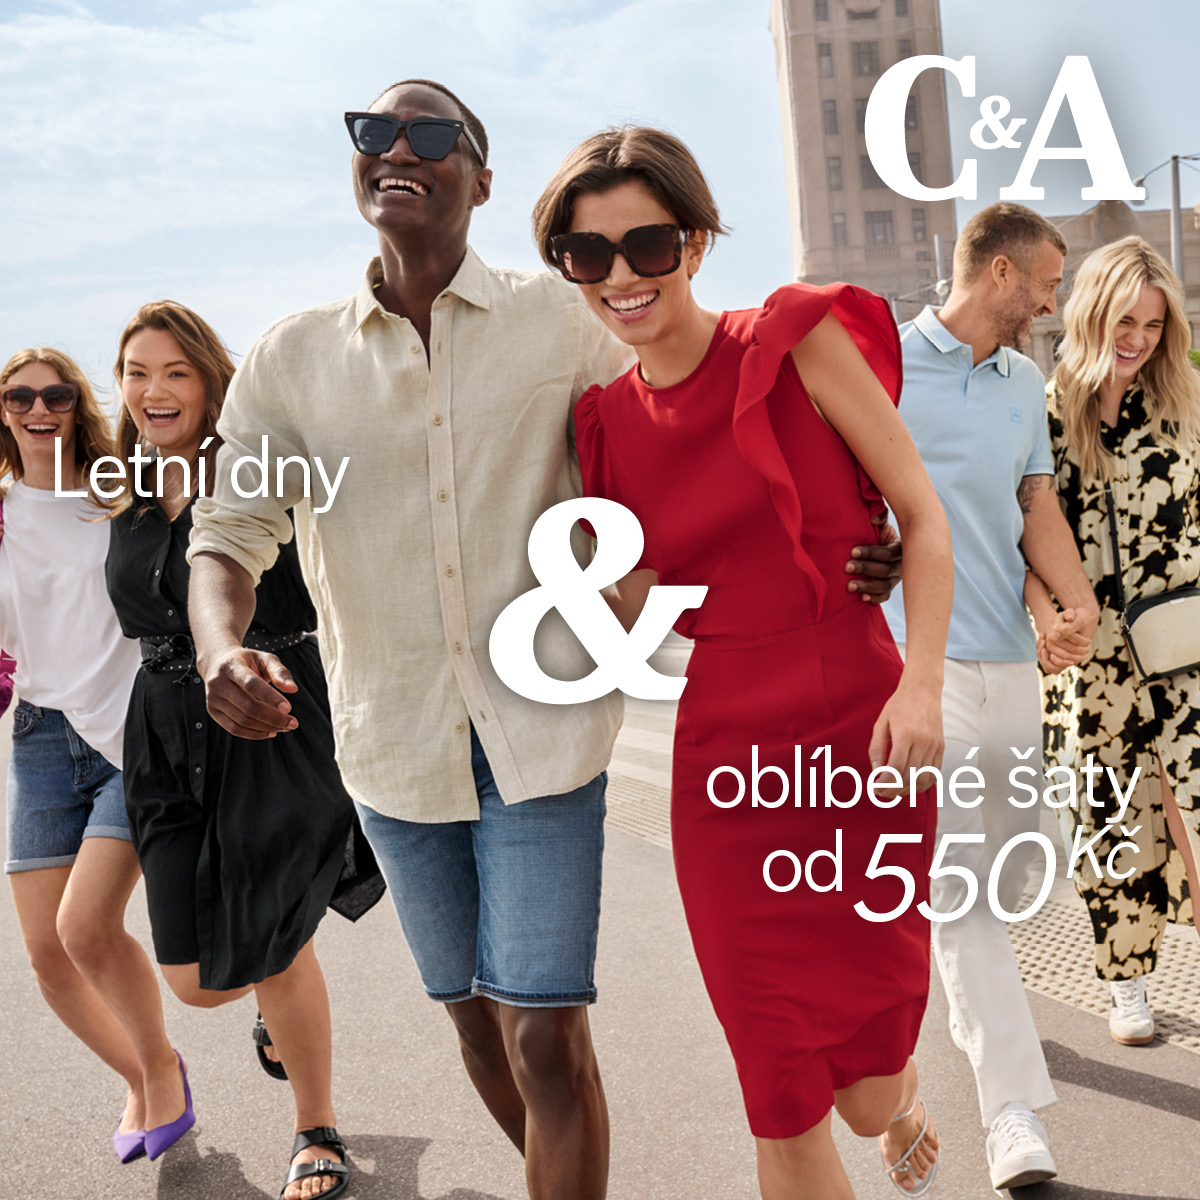 New summer collection at C&A